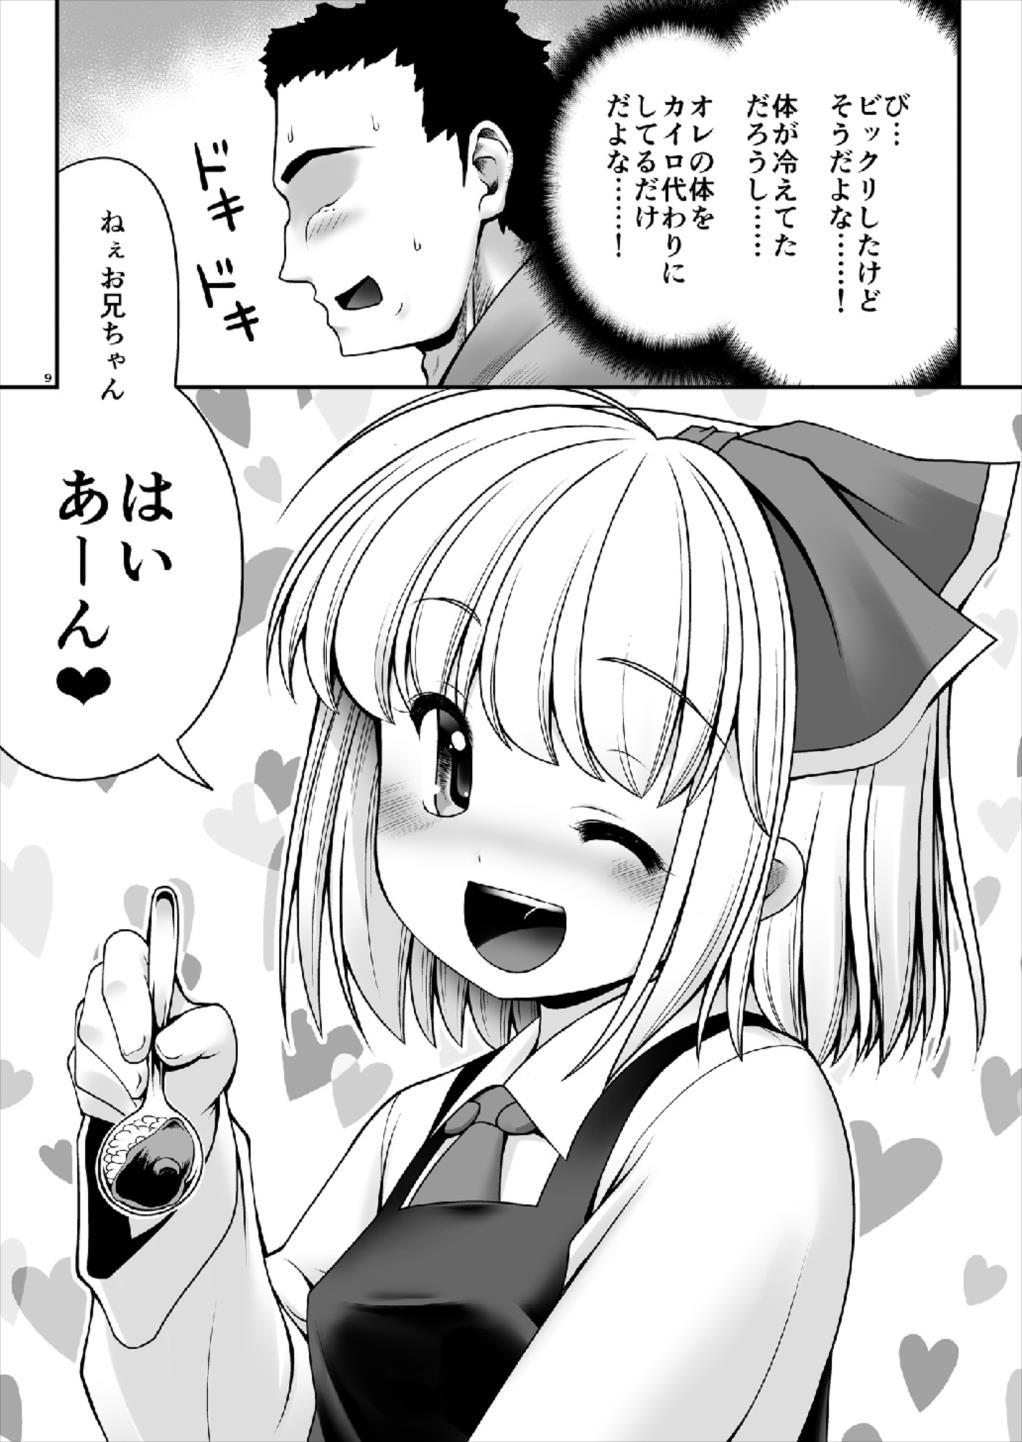 Old And Young "Okaeshi" - Touhou project Office Sex - Page 8